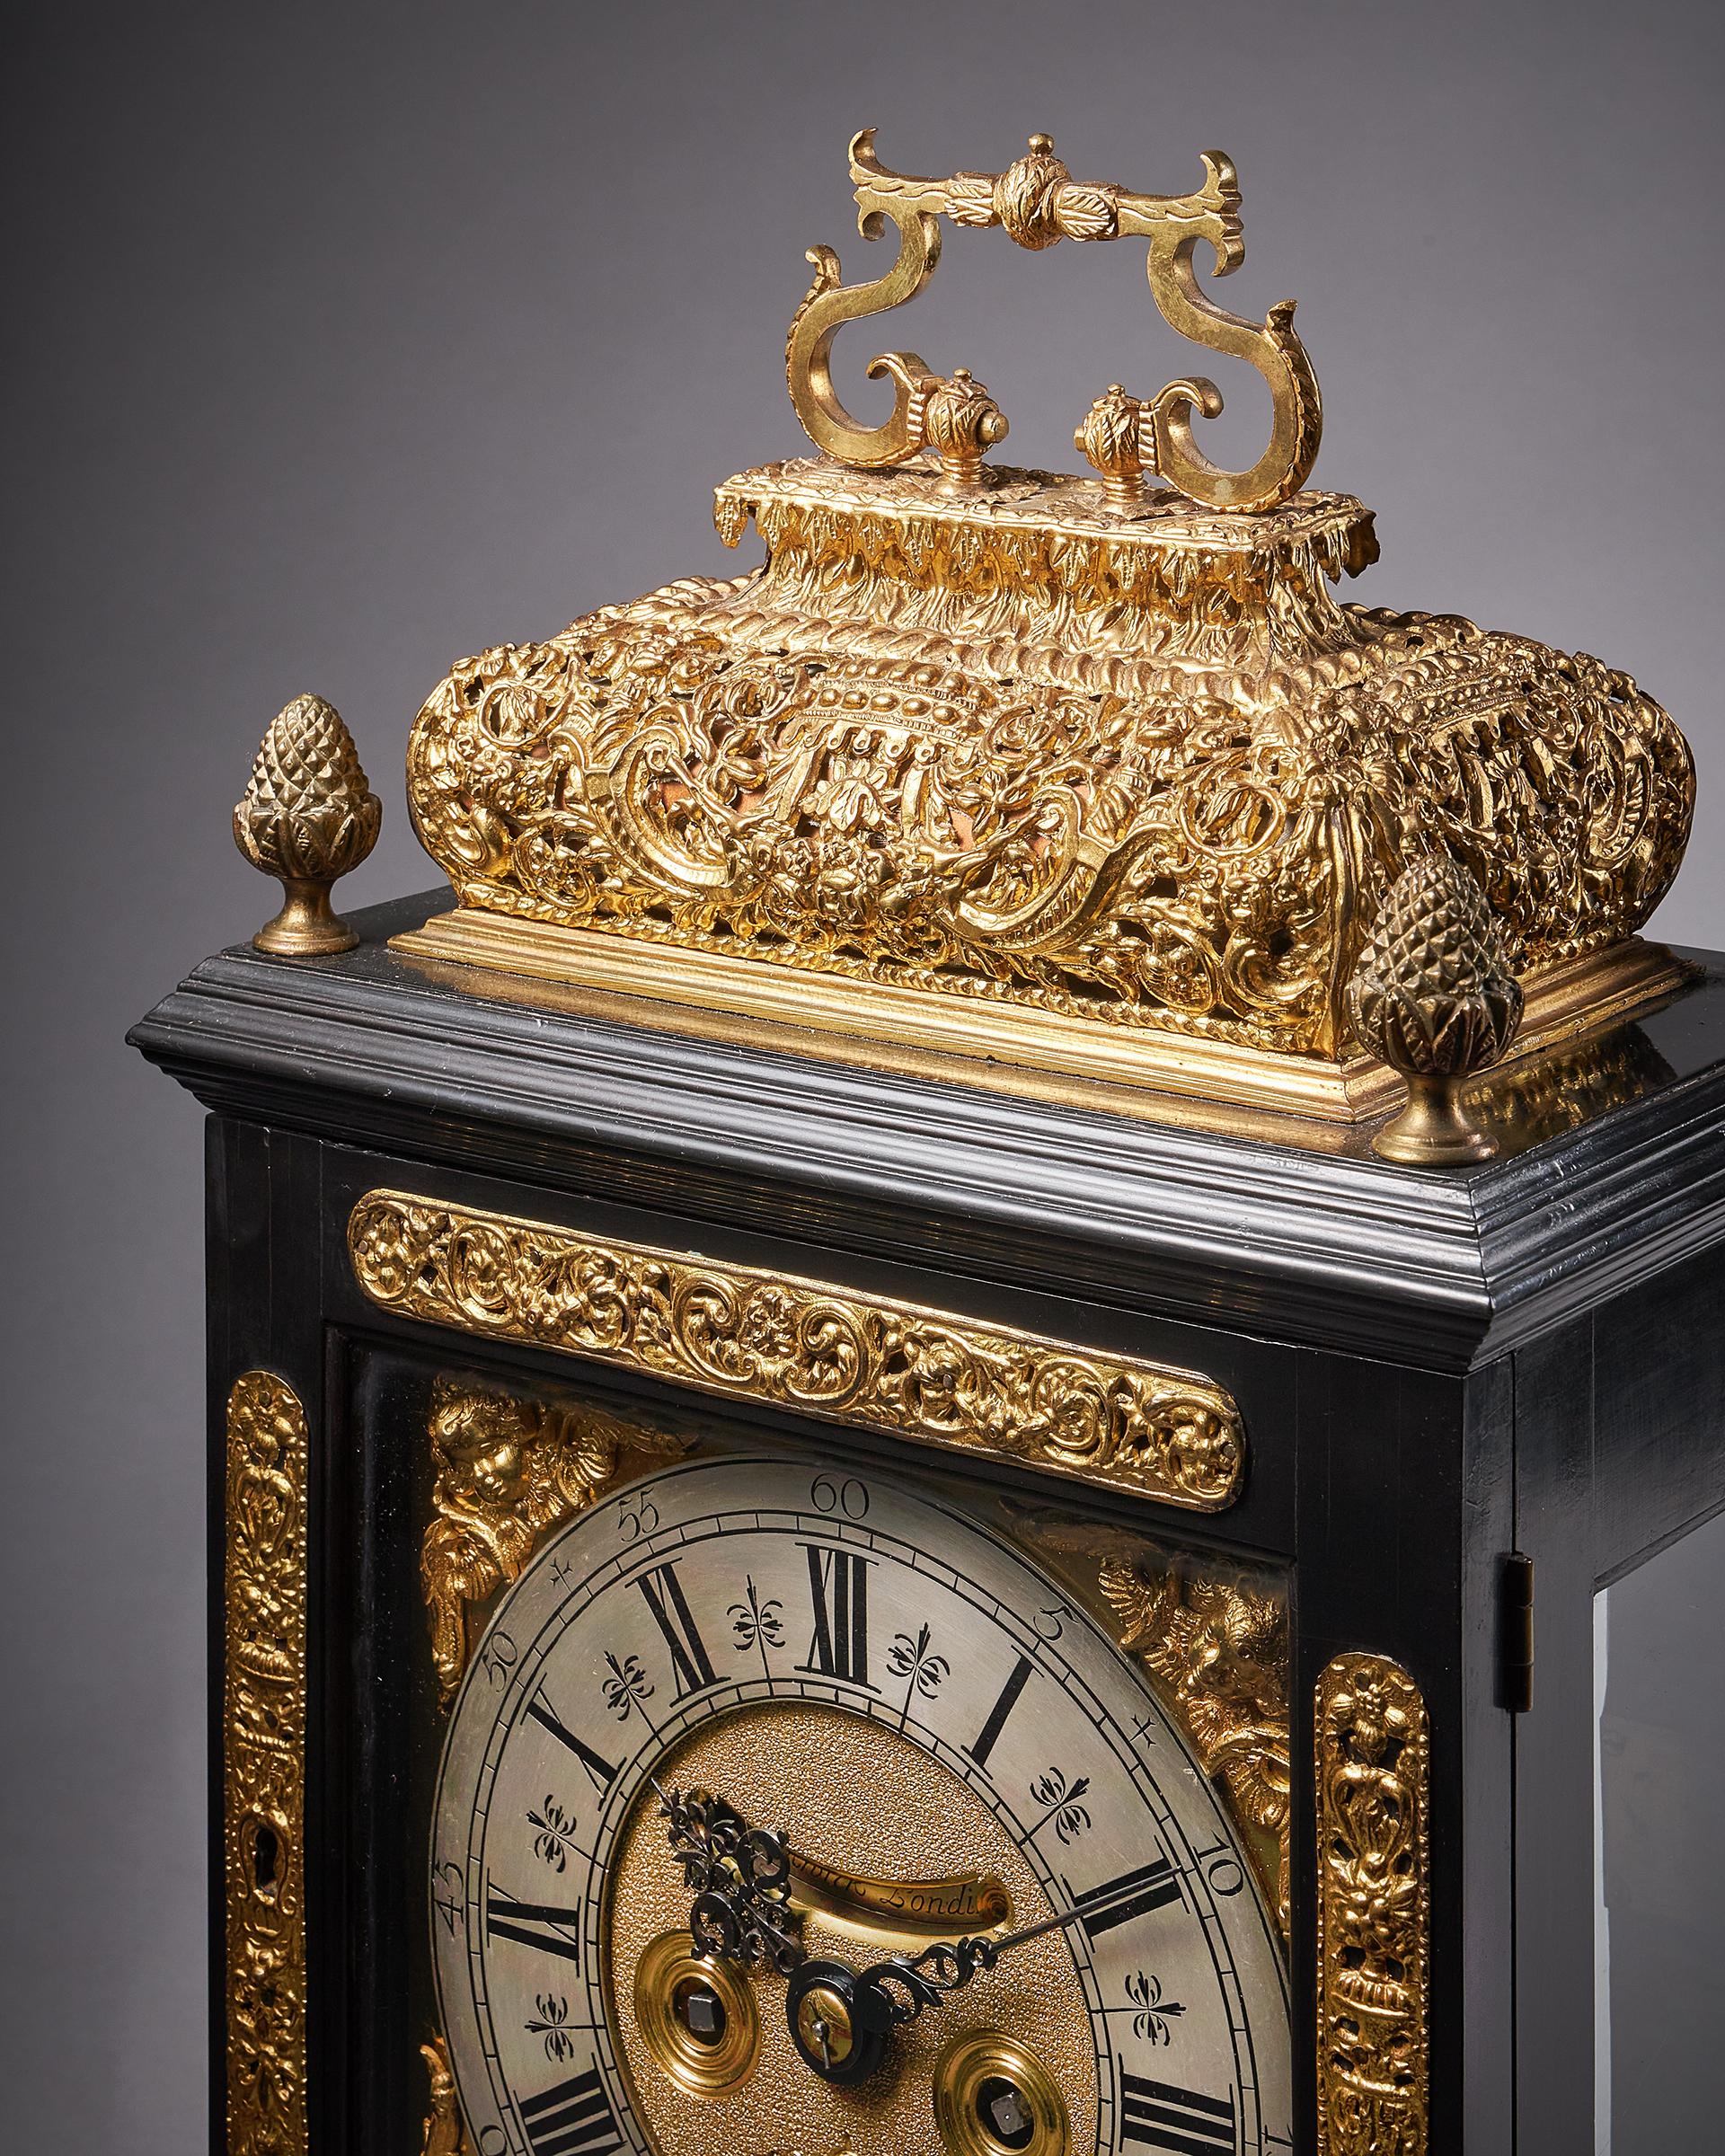 English 17th century William and Mary Ebony Eight-Day table clock by James Markwick